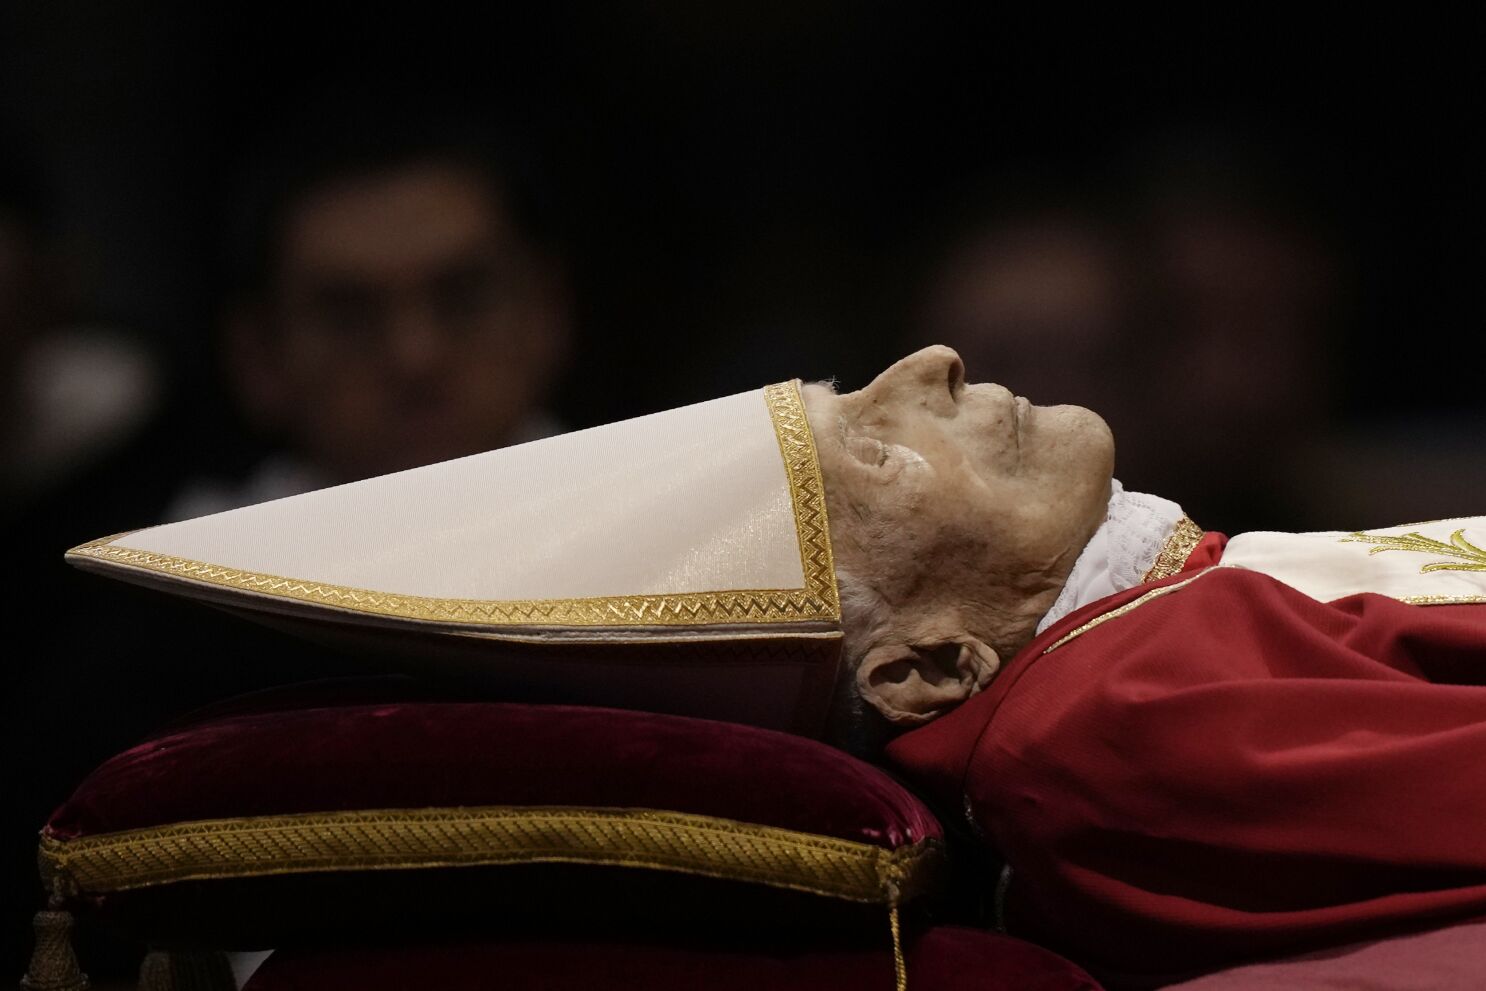 view former Pope Benedict XVI lying in state - Angeles Times